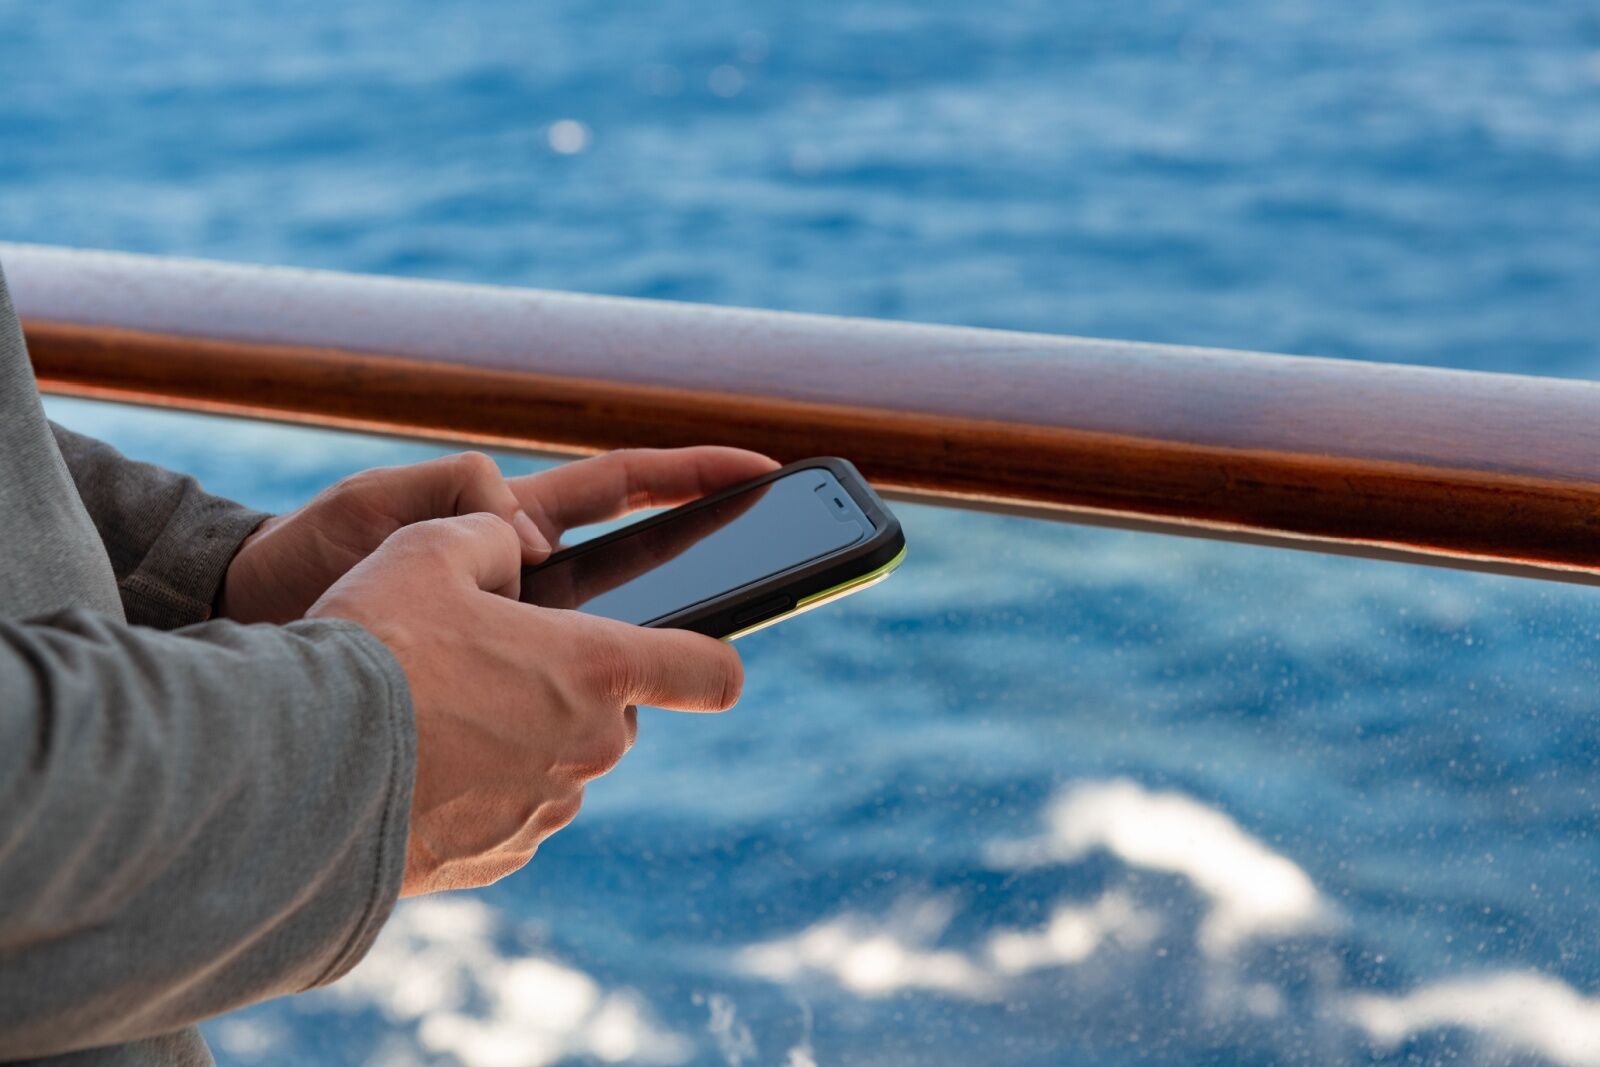 hands at sea holding a mobile phone